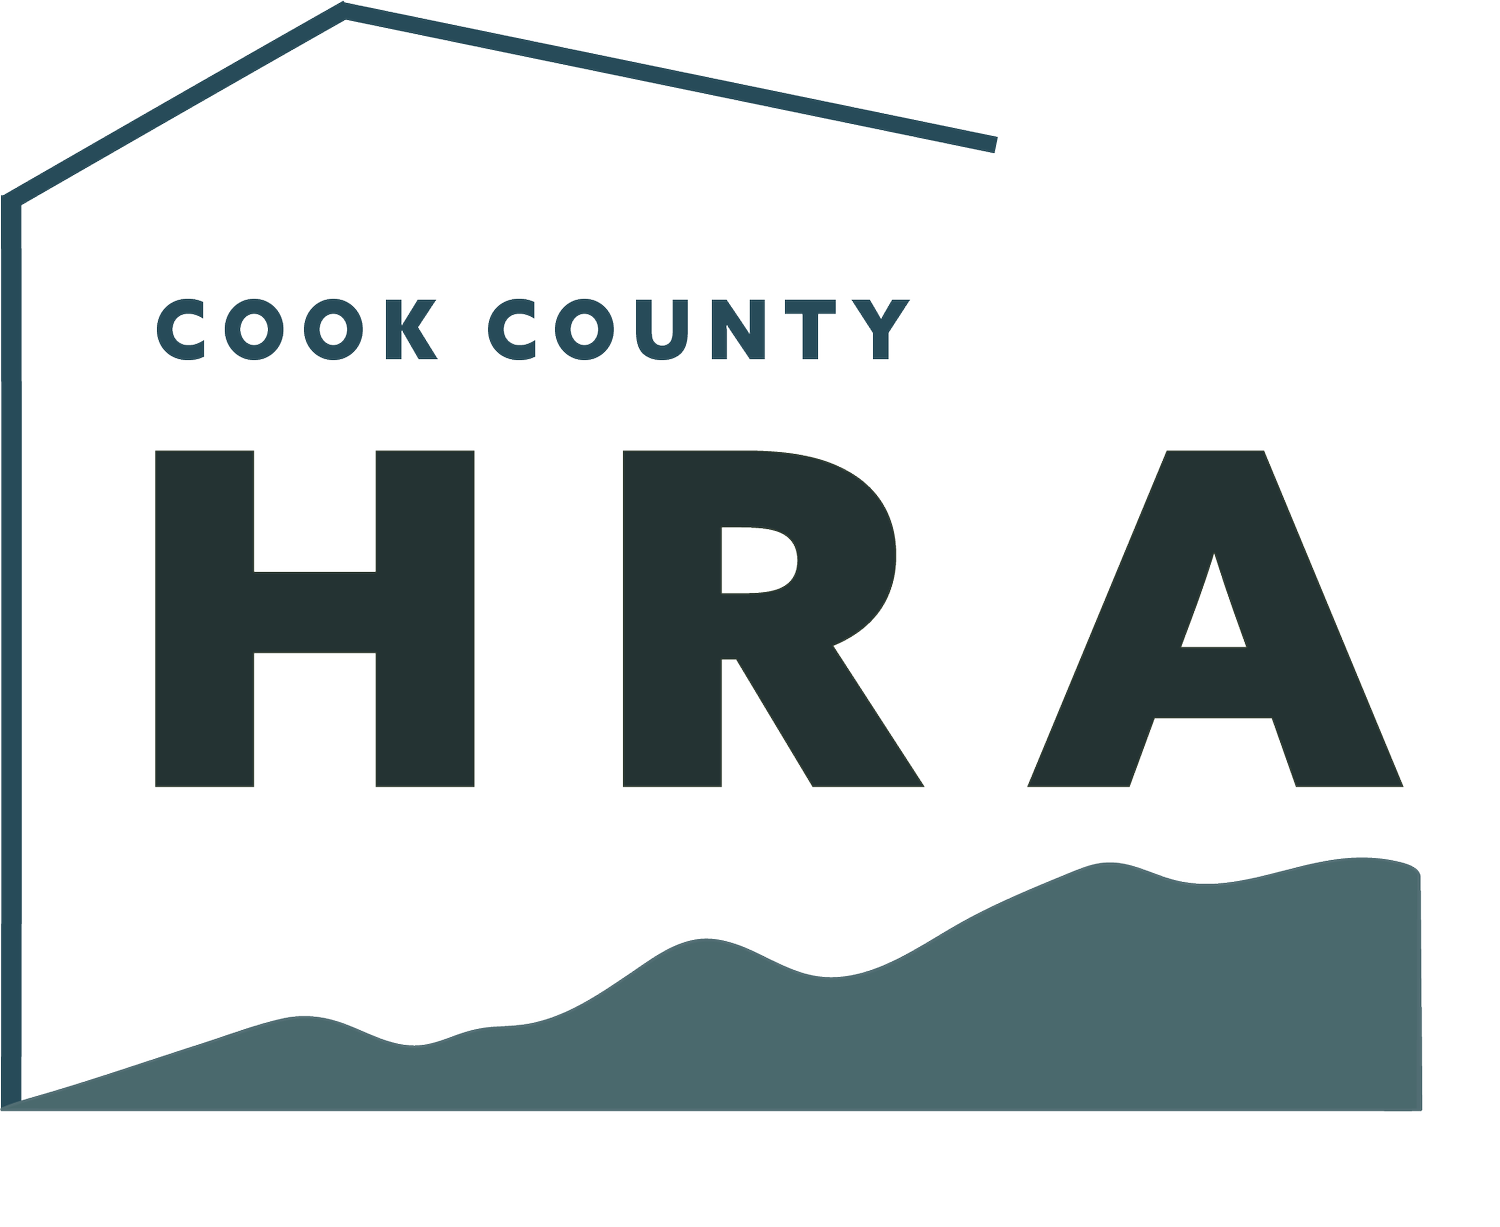 Cook County HRA